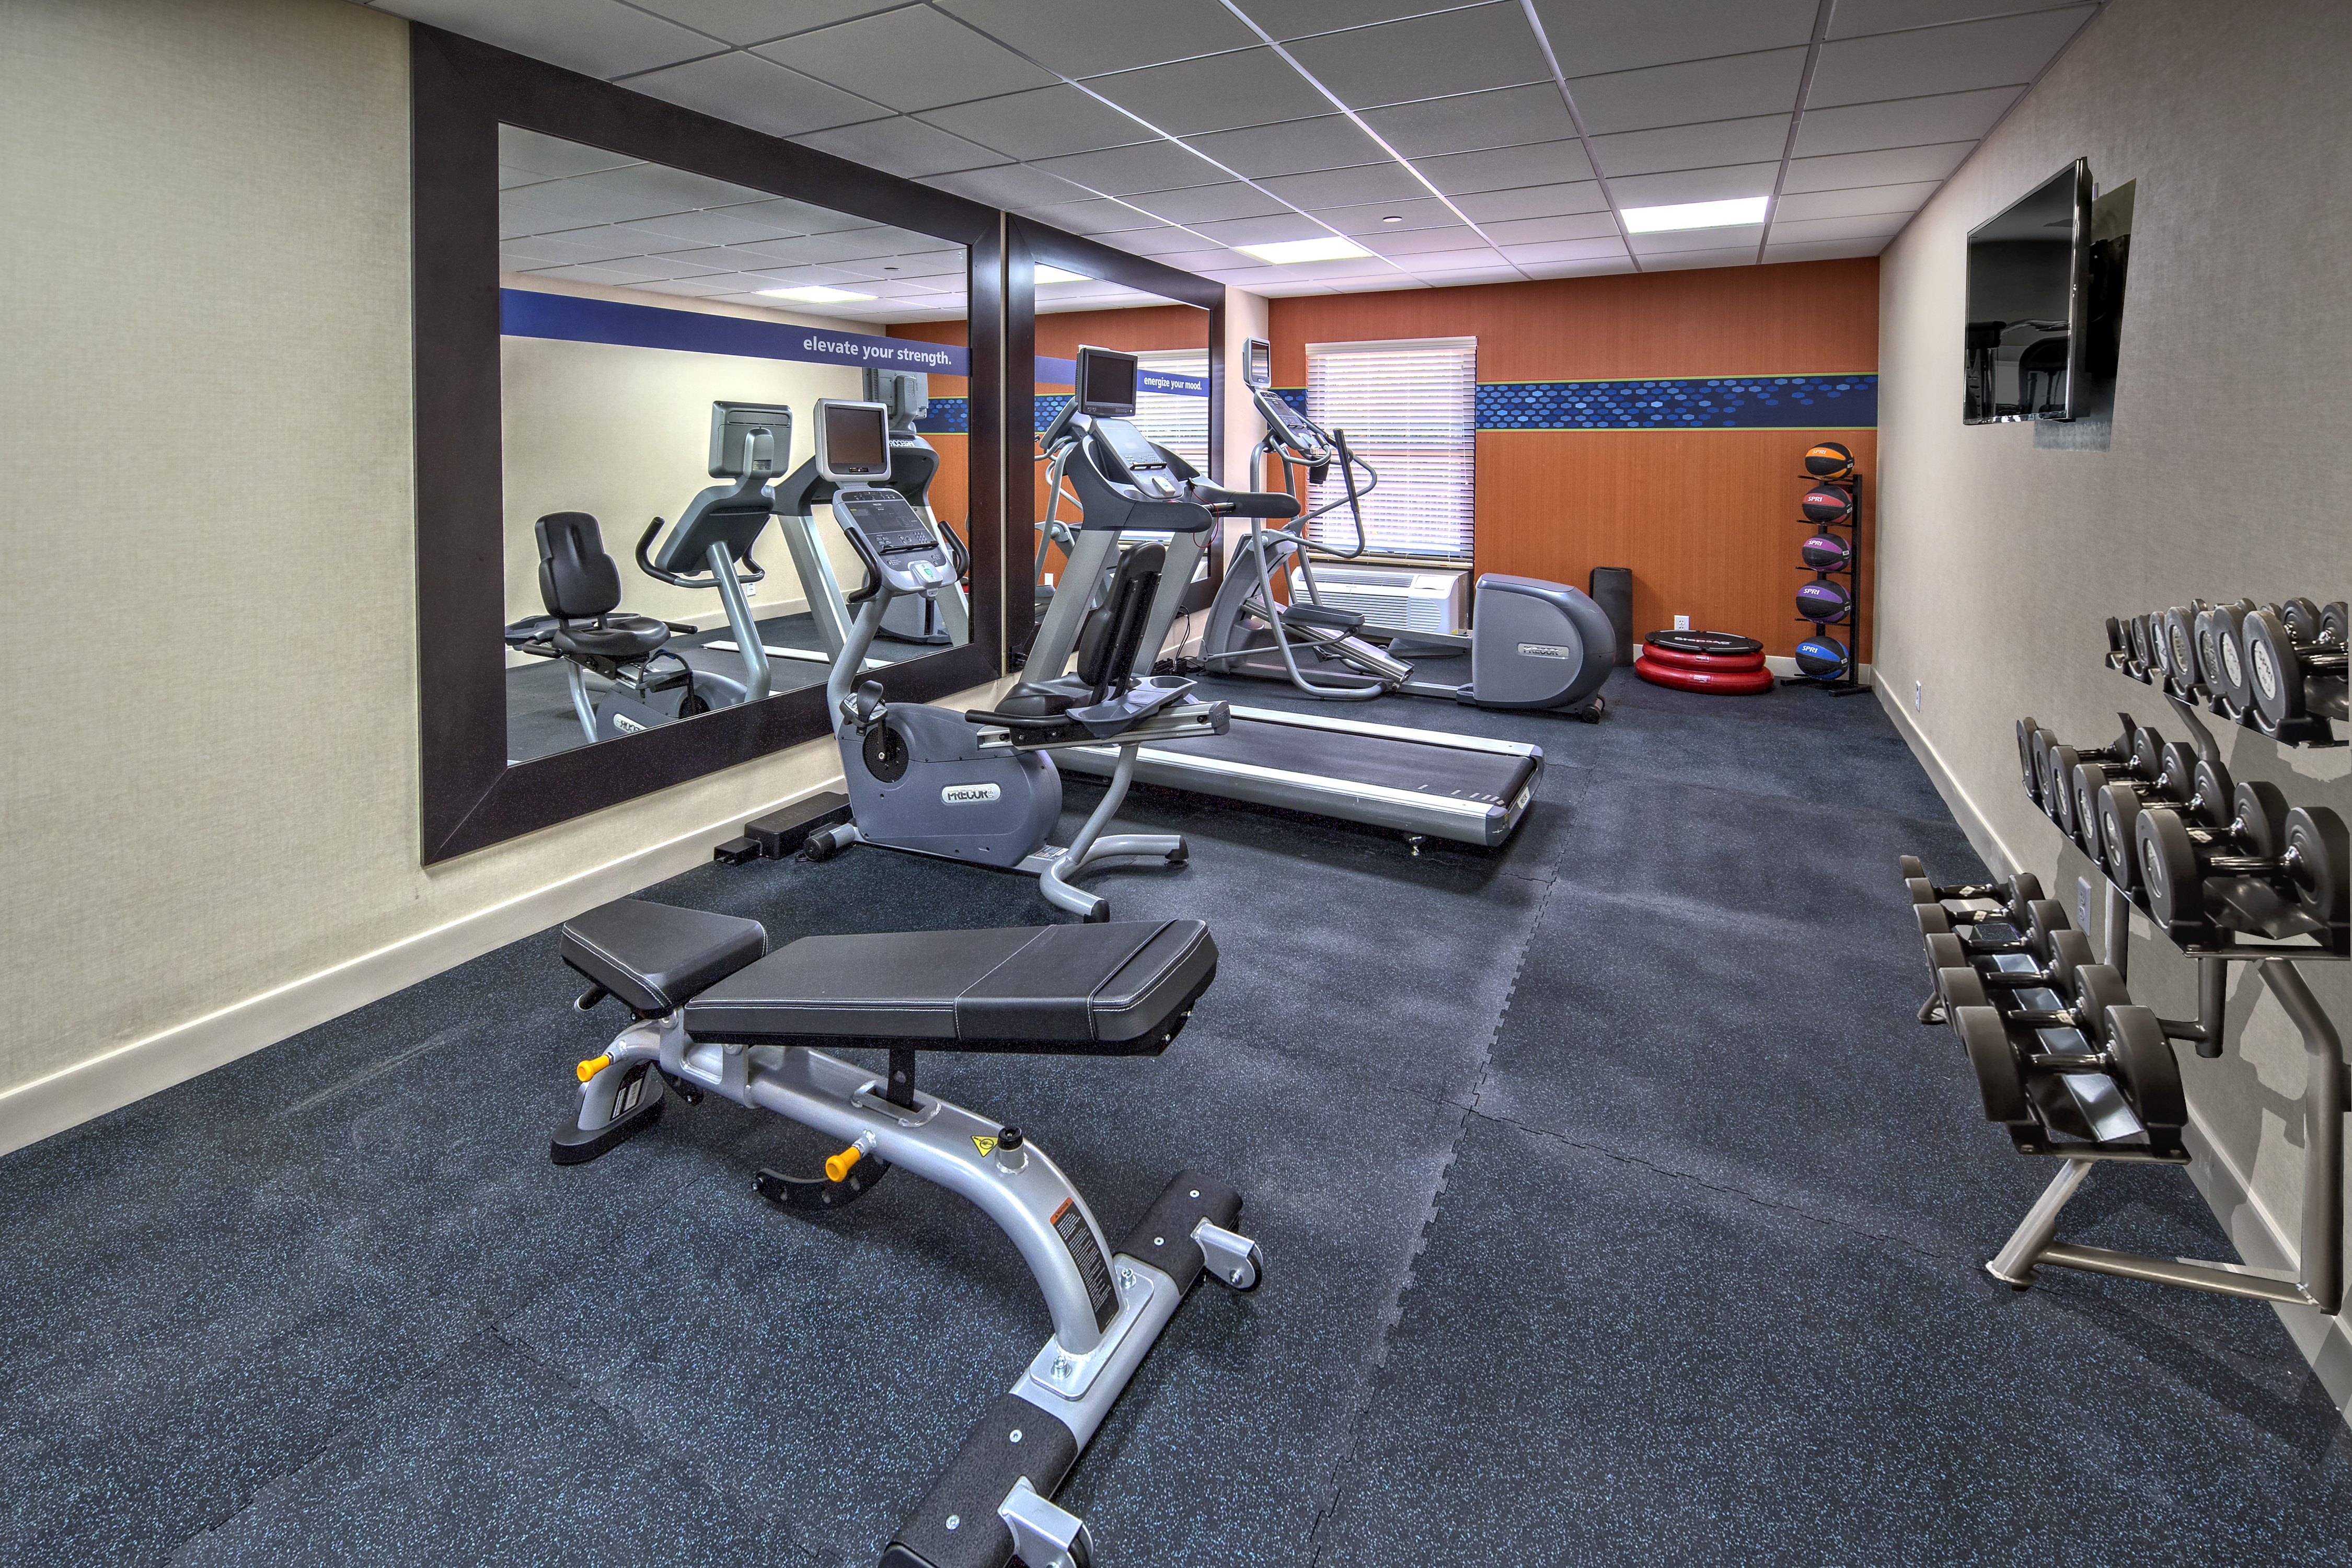 Fitness Center With TV, Free Weights, Cardio Equipment Facing Large Mirrors, and Aerobic Stepper, and Weight Balls